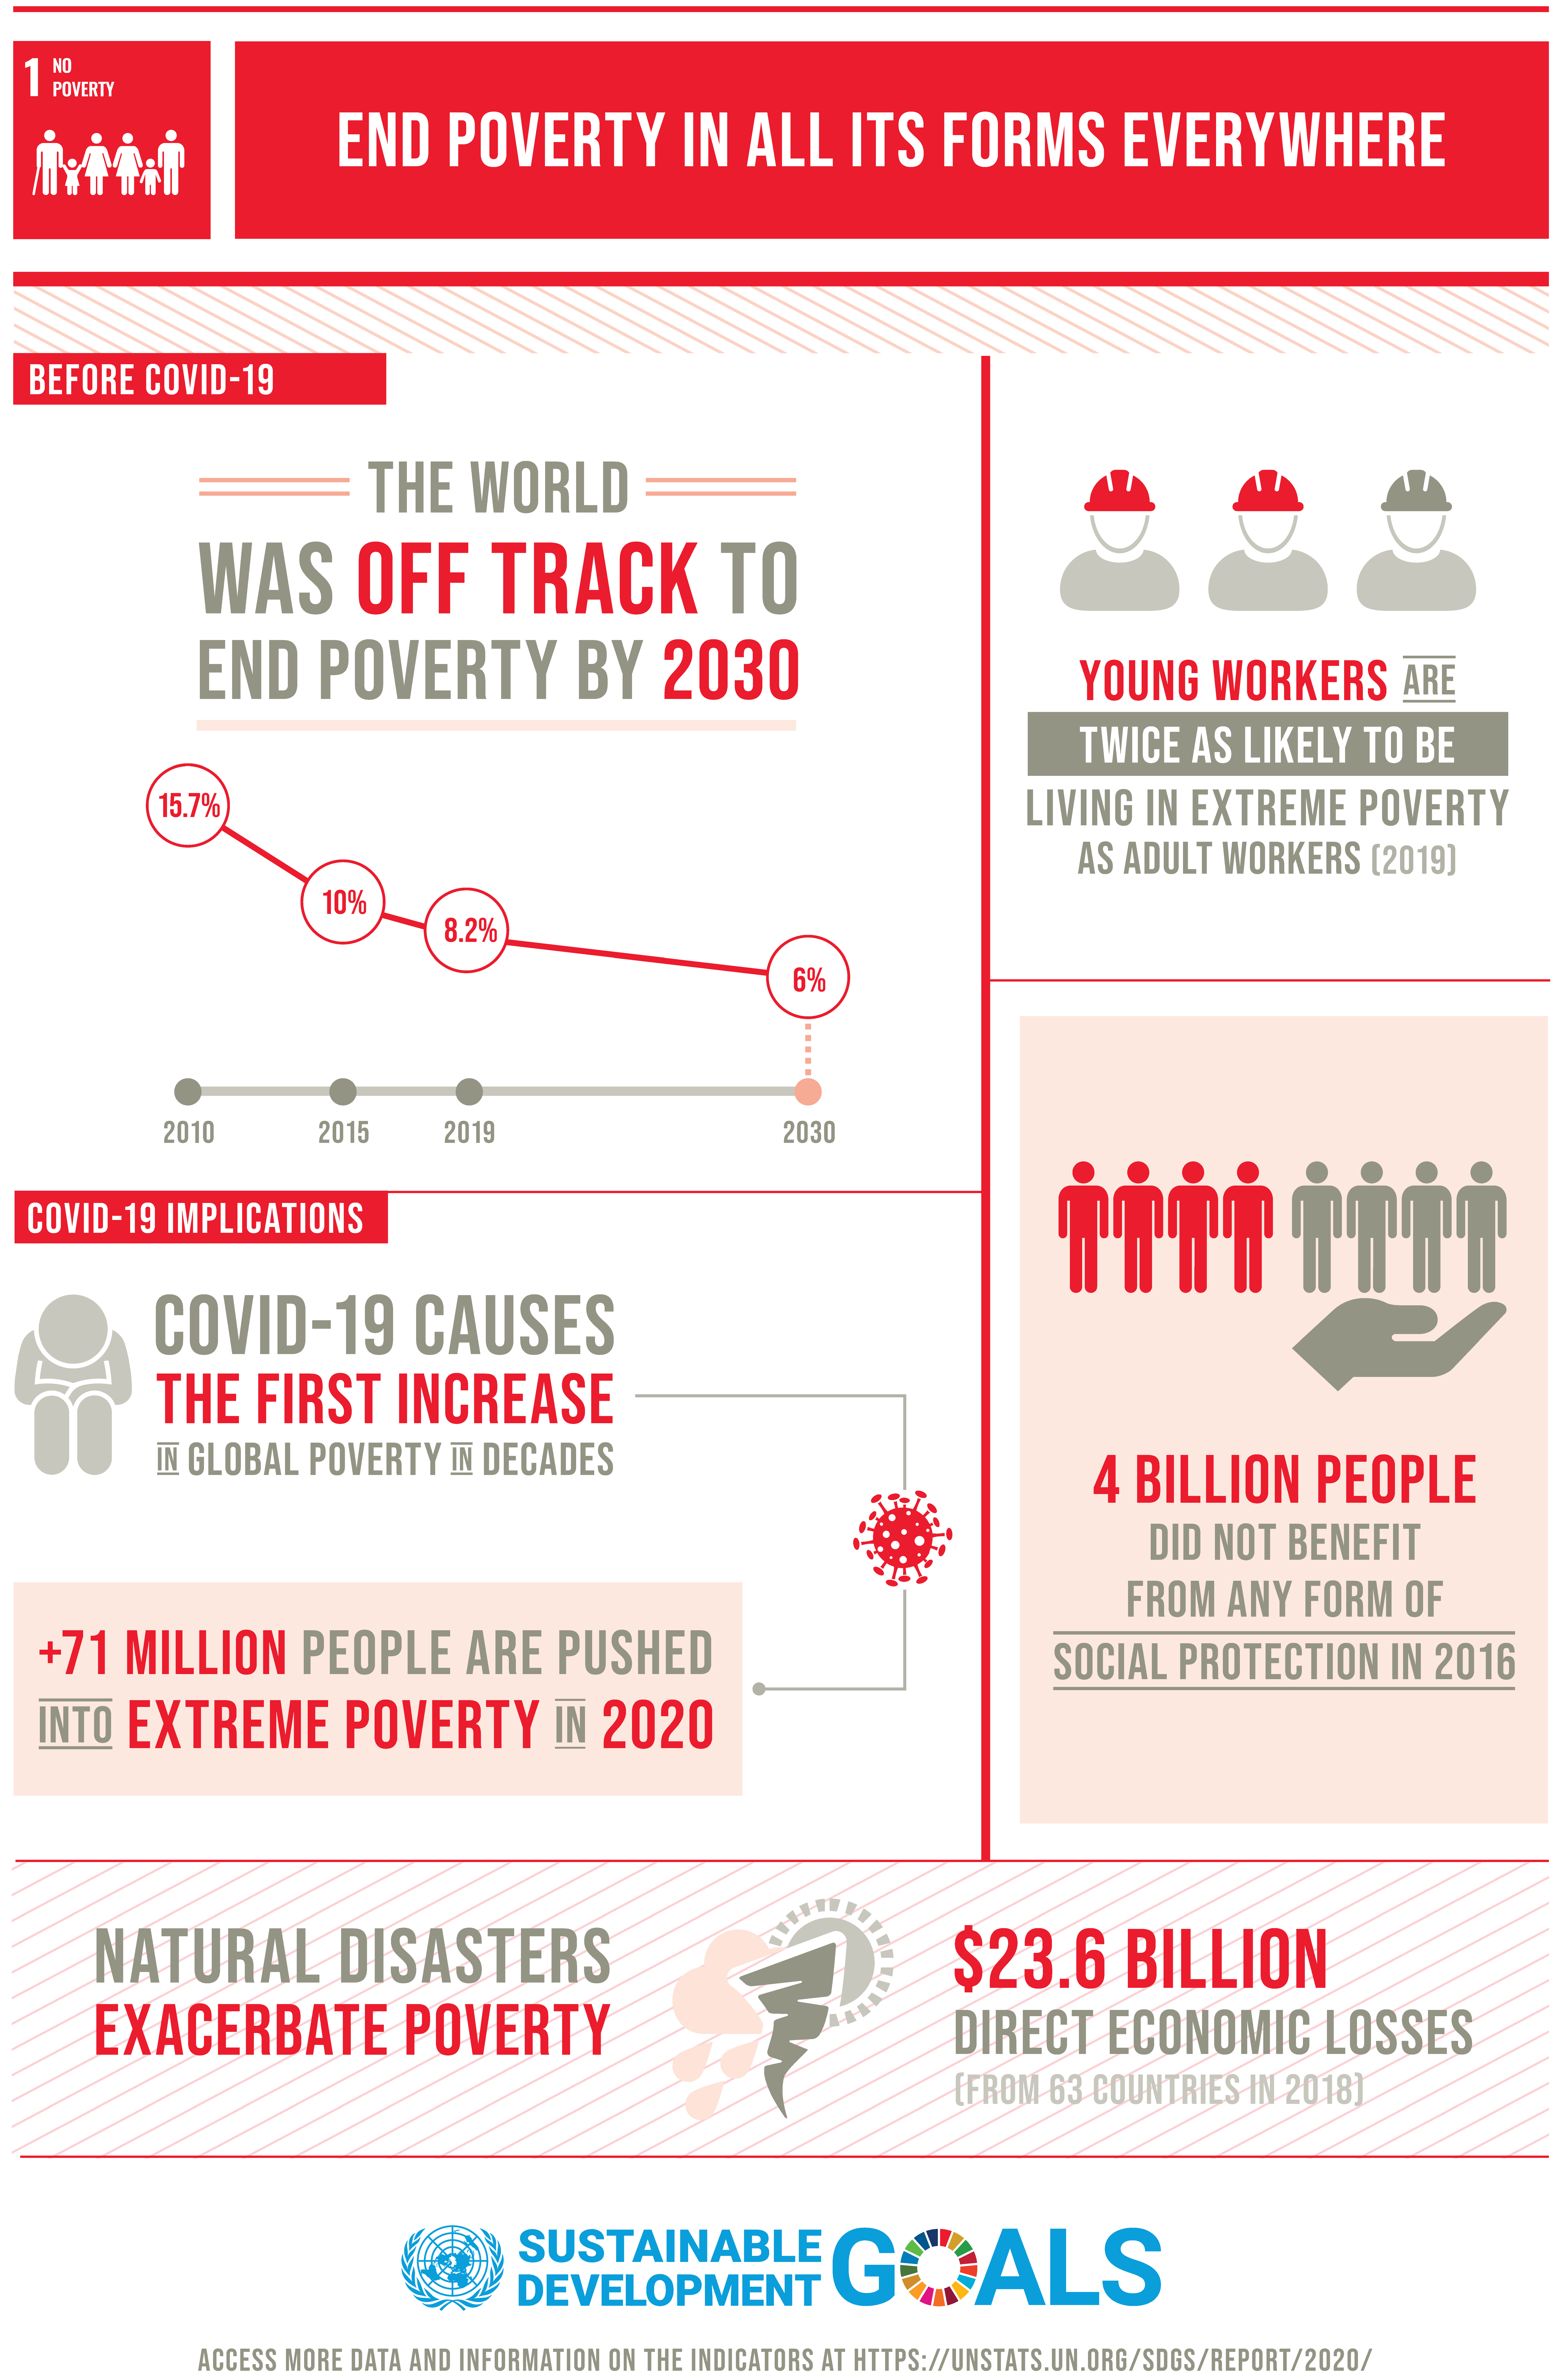 Infographic about sustainable development goal 1